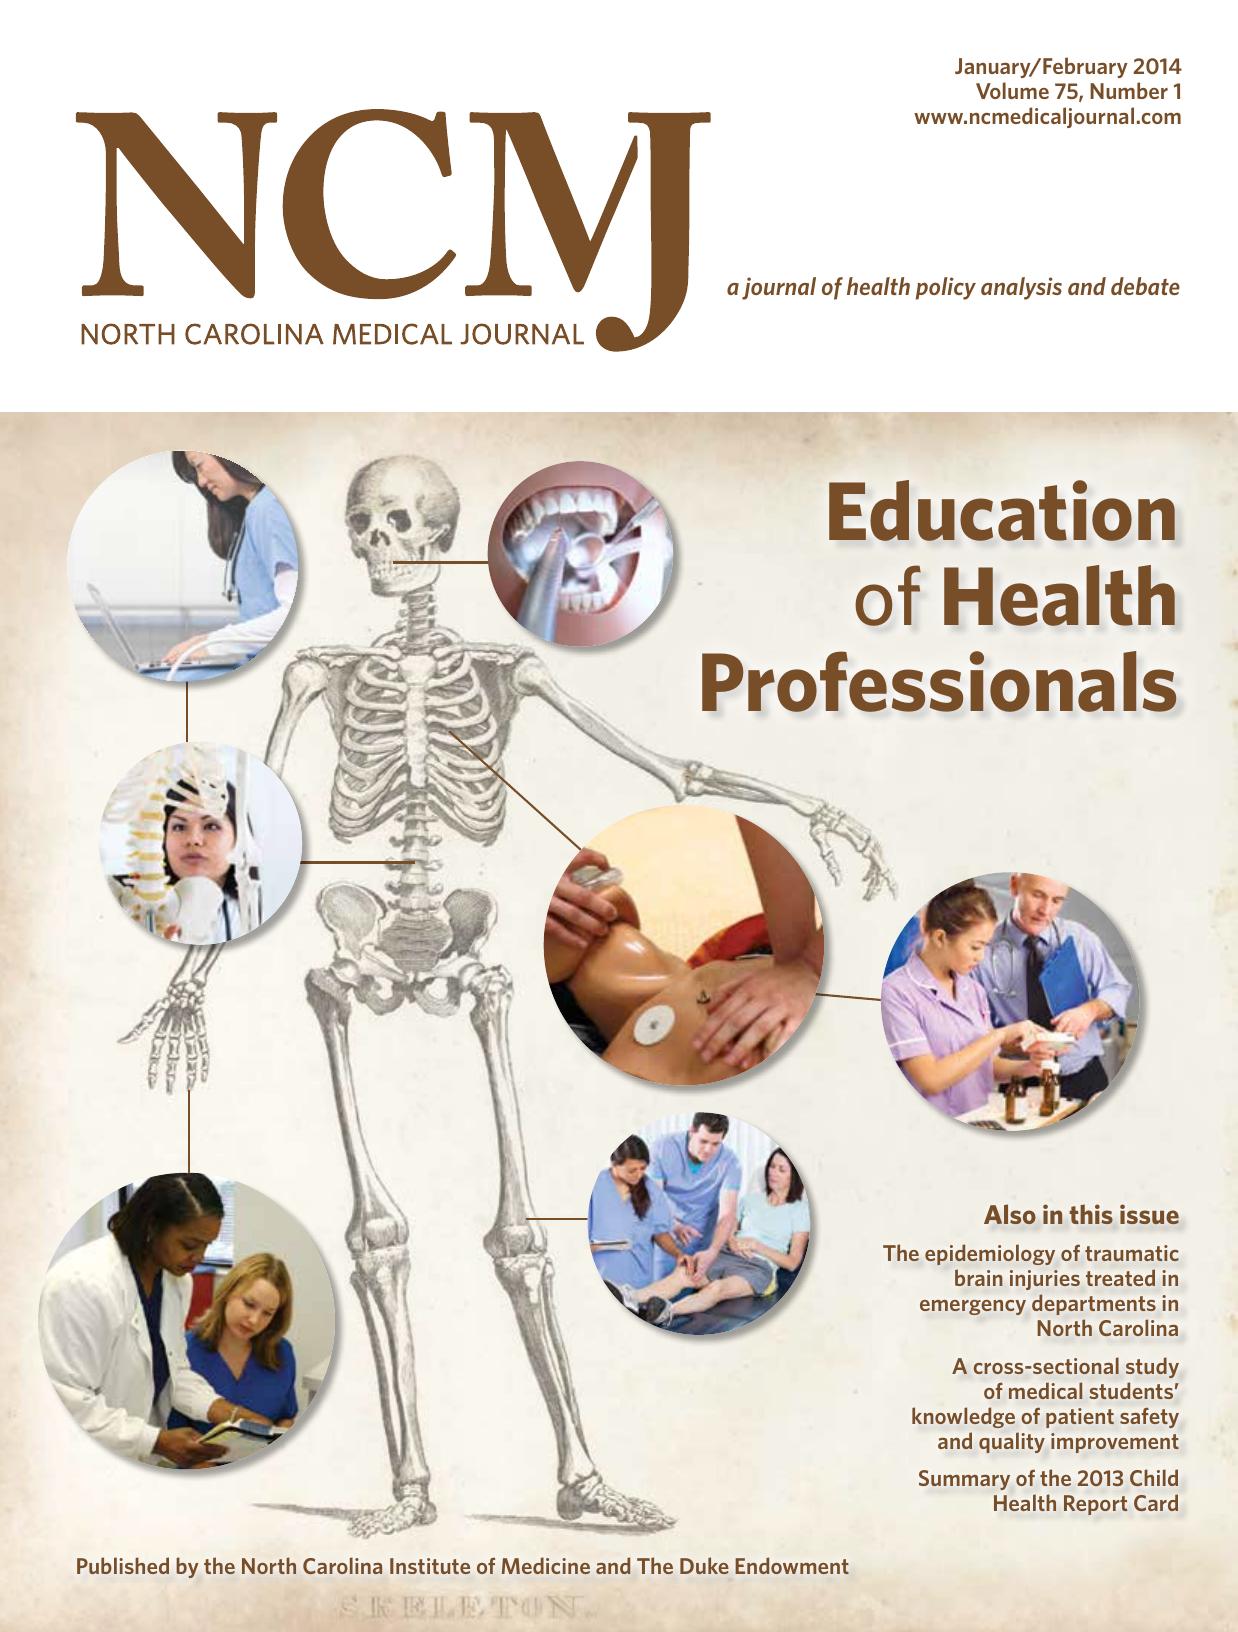 Education of Health Professionals 2014